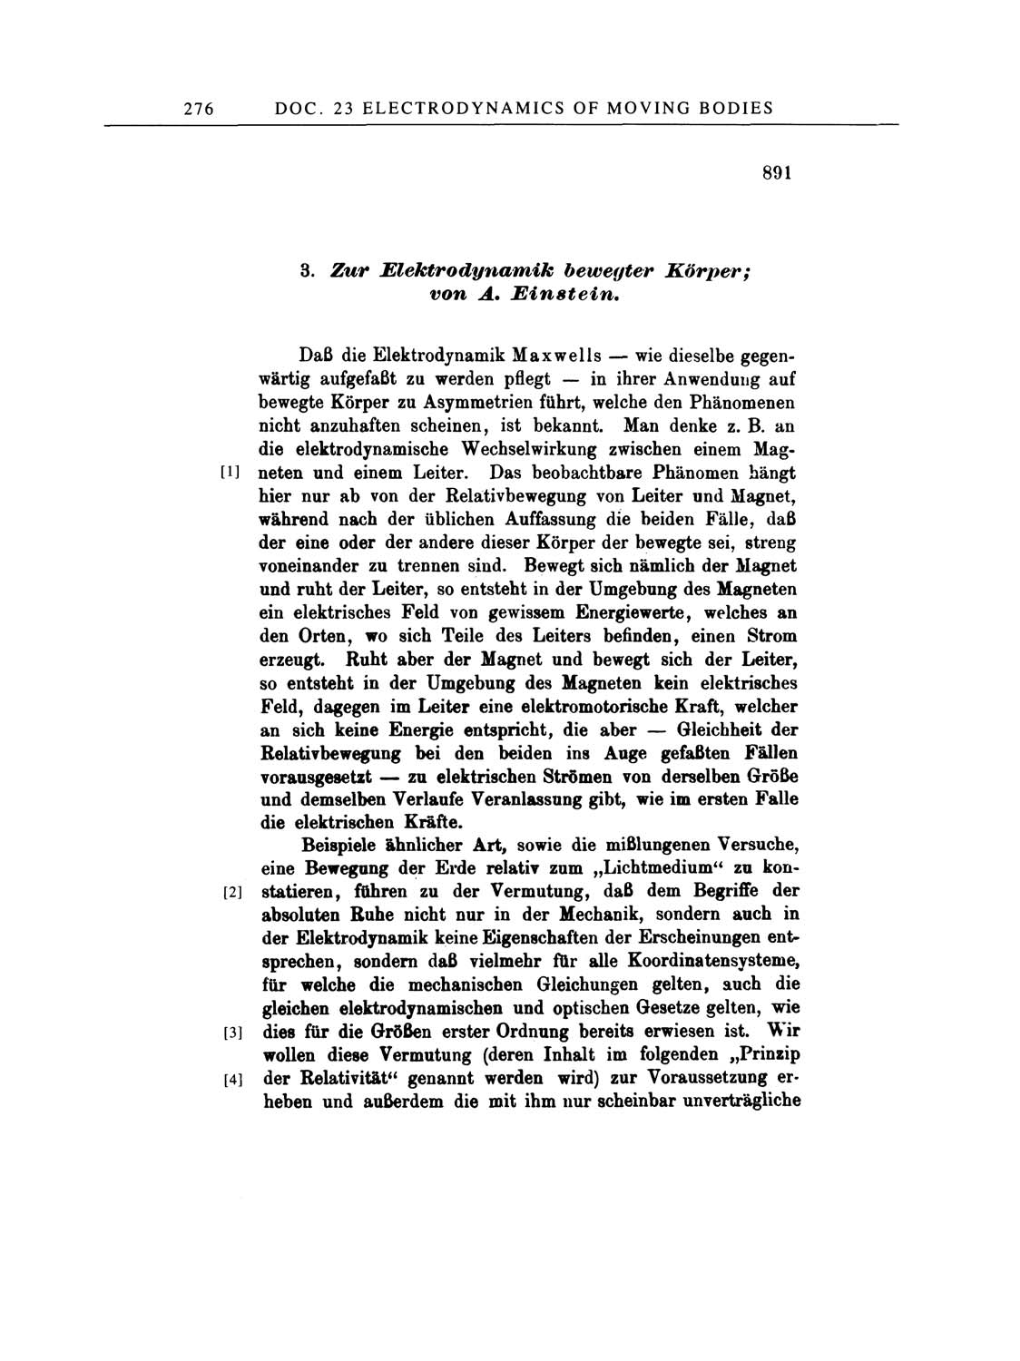 Volume 2: The Swiss Years: Writings, 1900-1909 page 276